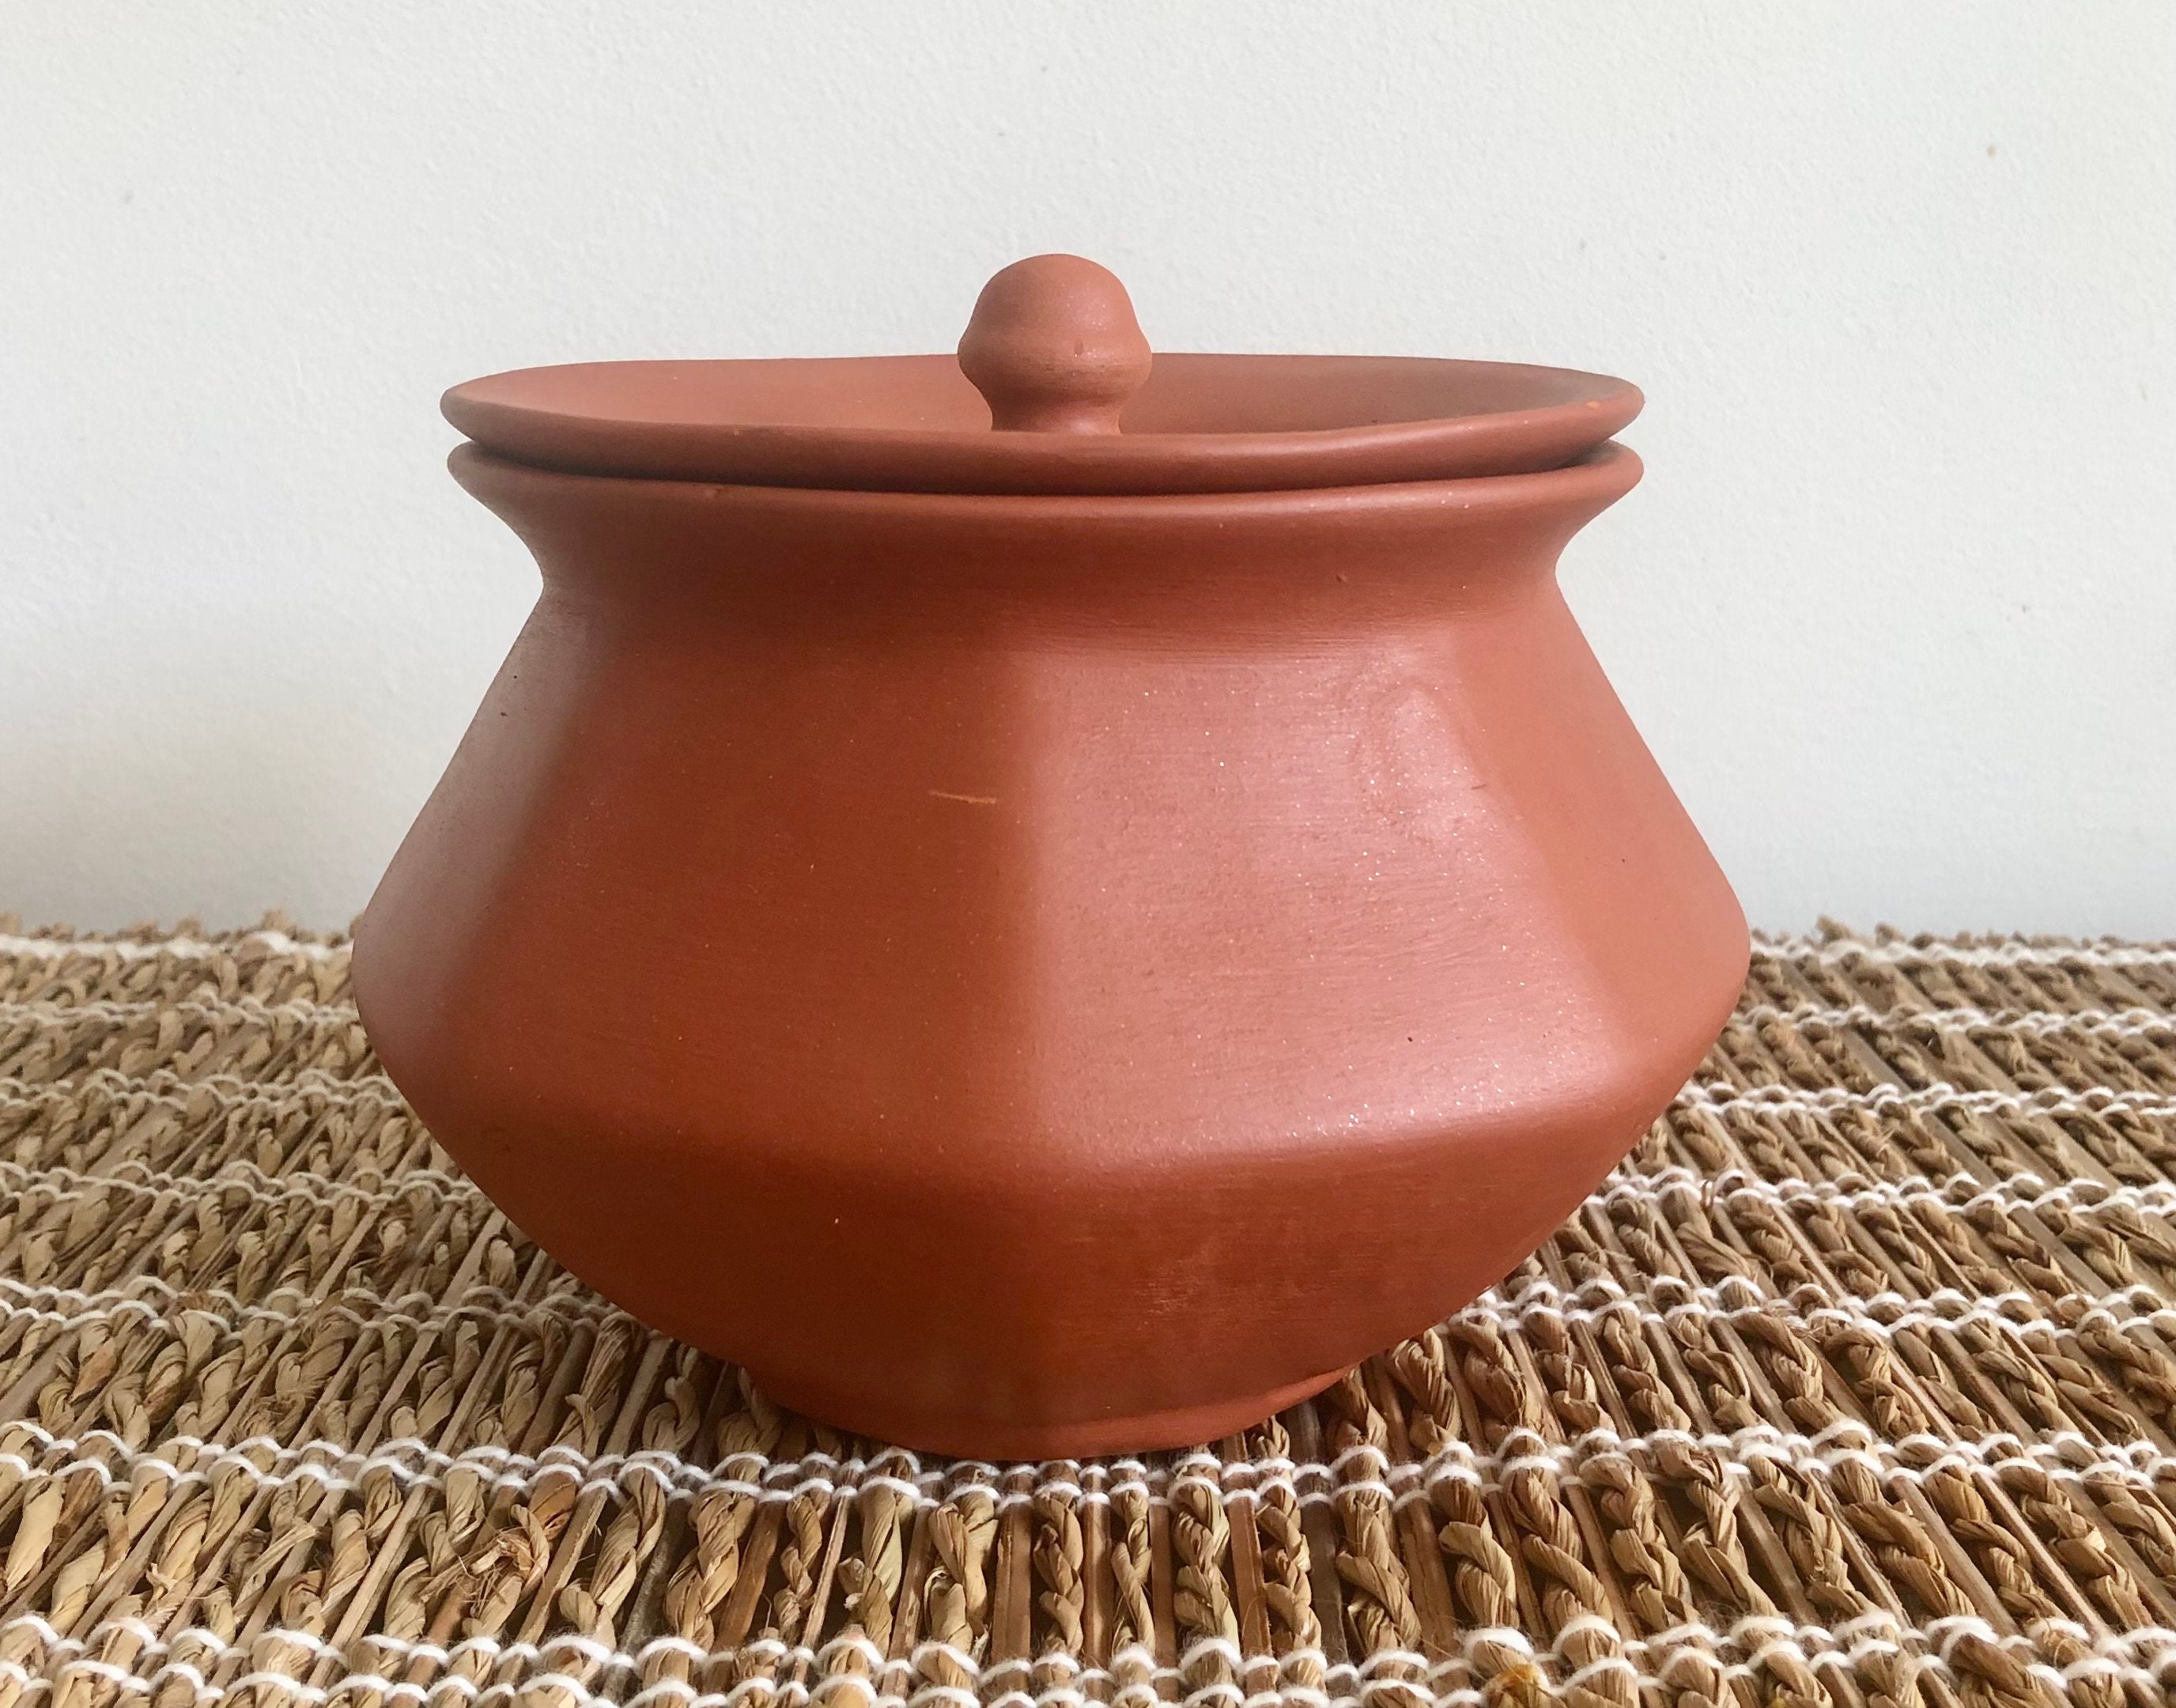 Handmade Clay Low Pot for Cooking with Lid, Natural Lead-Free Unglazed  Earthen Cookware, Clay Yogurt Pots, Big Terracotta Pans Suitable for  Cooking